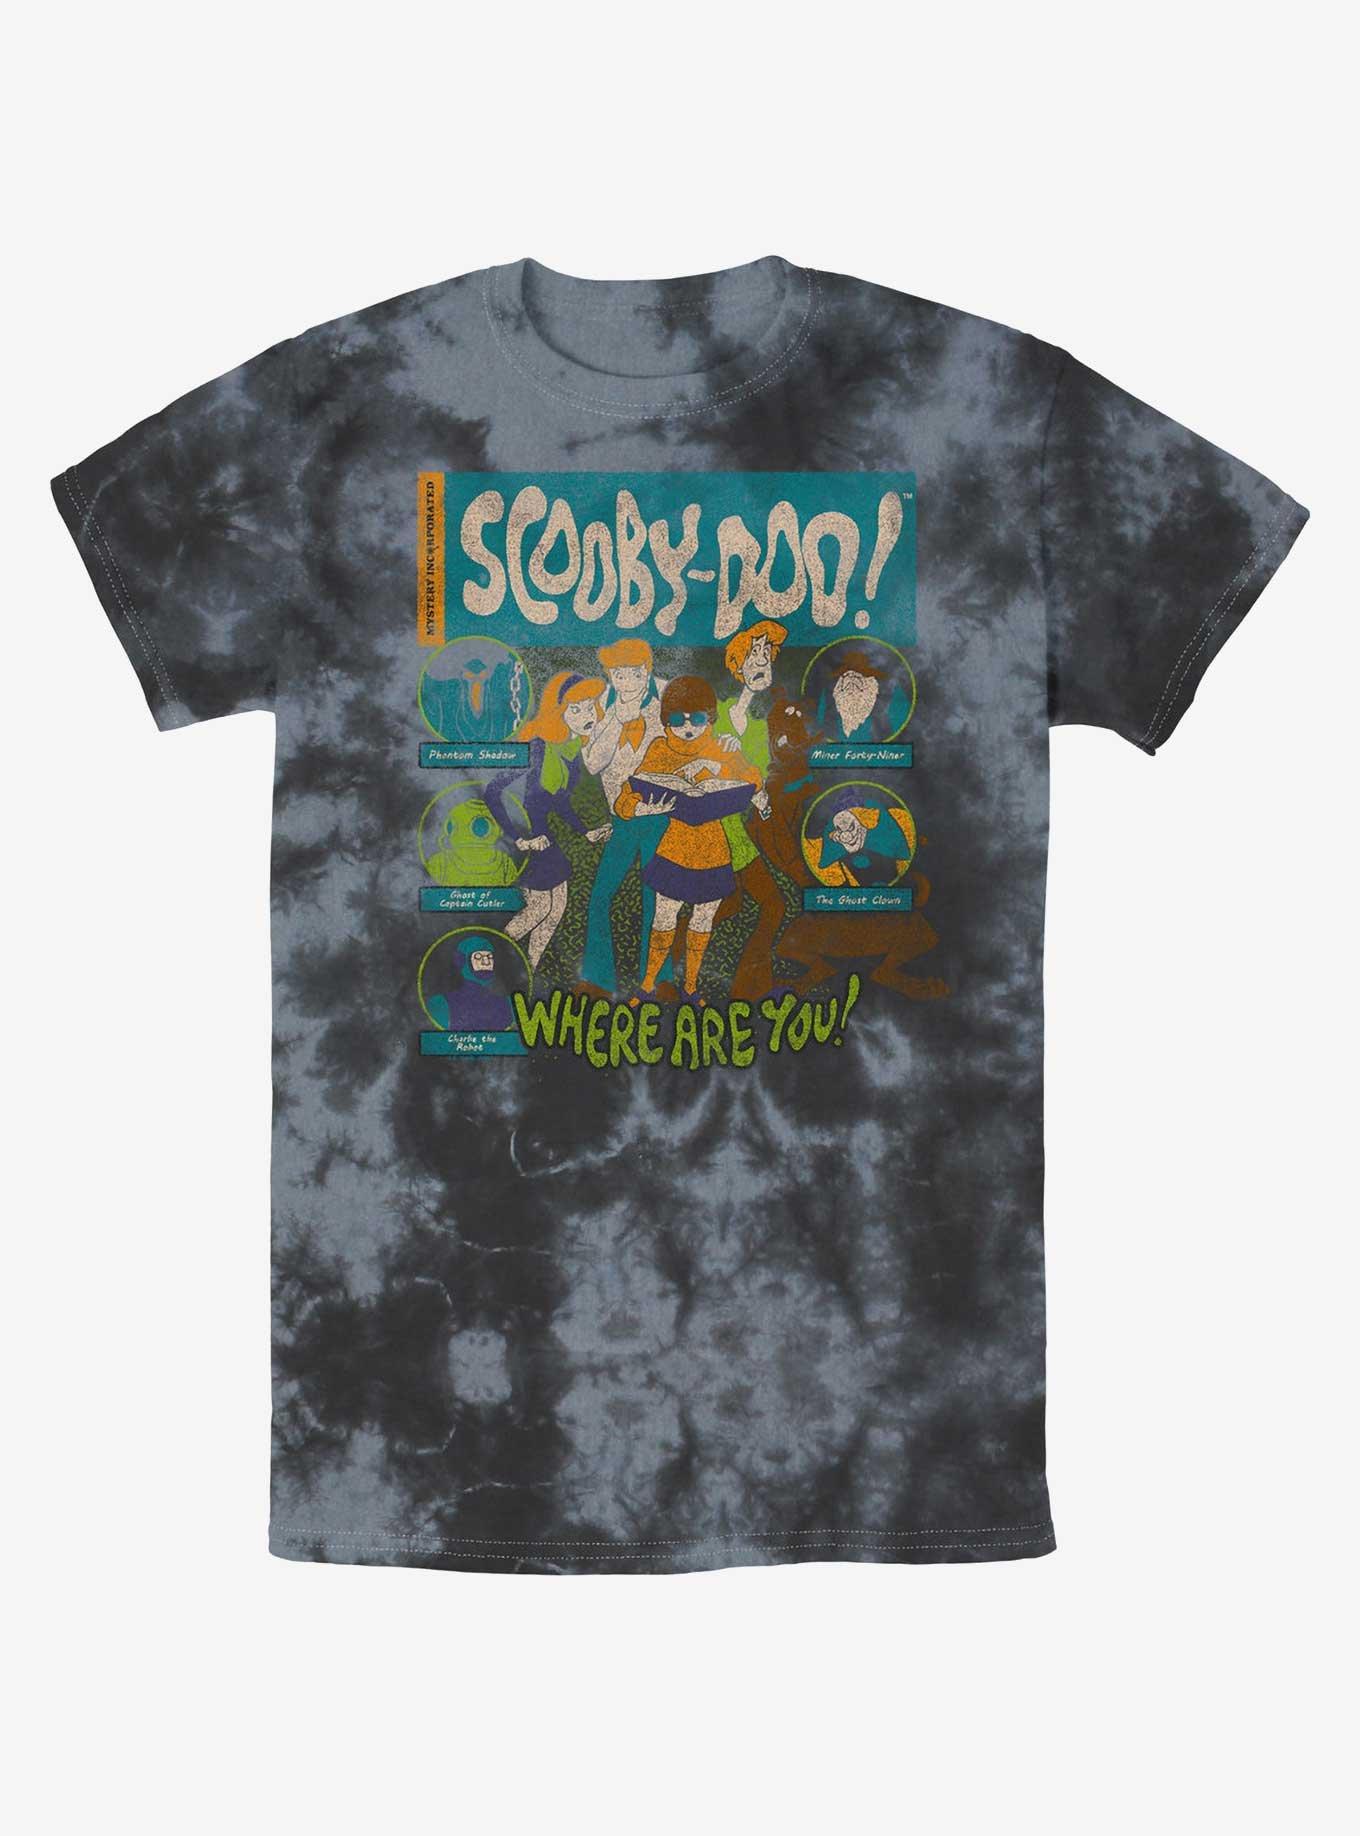 Scooby Doo Mystery Poster Tie-Dye T-Shirt - MULTI | Hot Topic